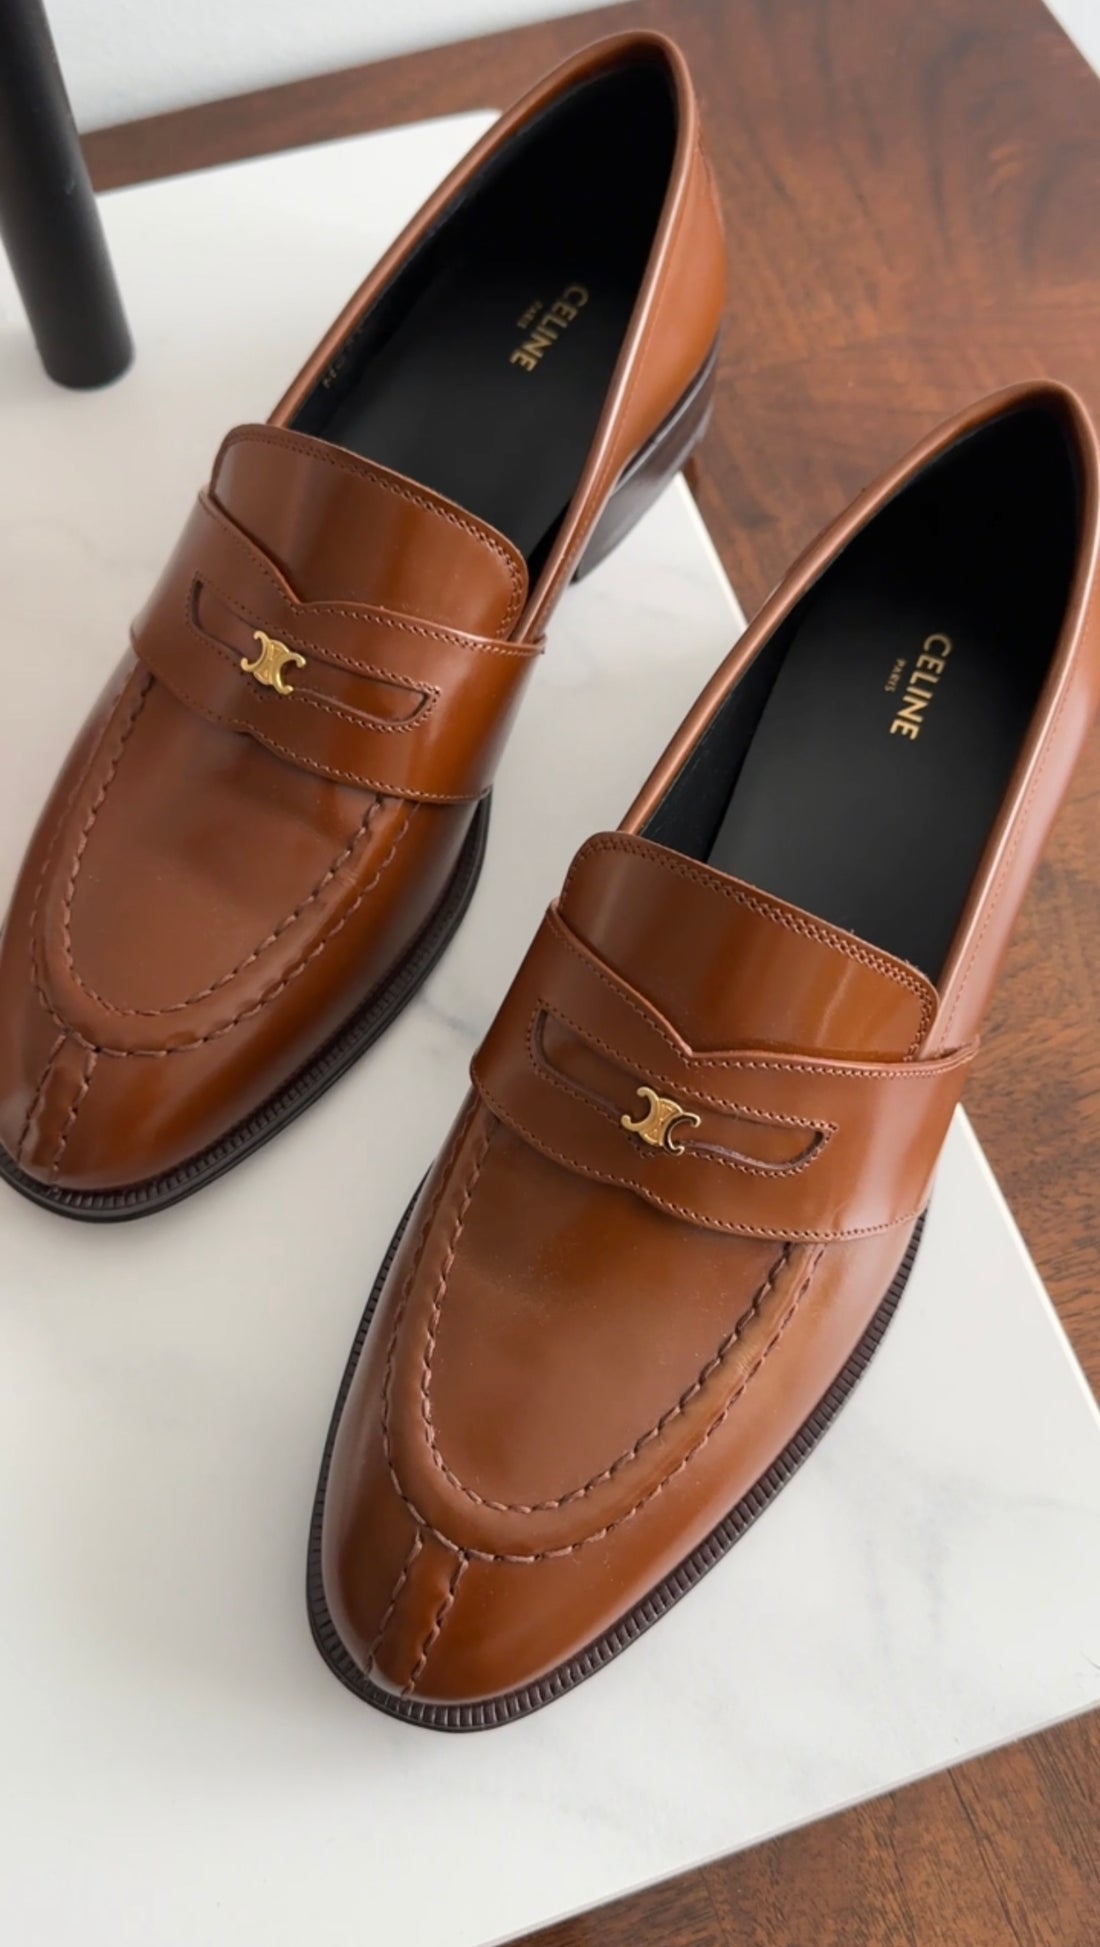 Celine Tan Polished Leather Triomphe Loafers - 37